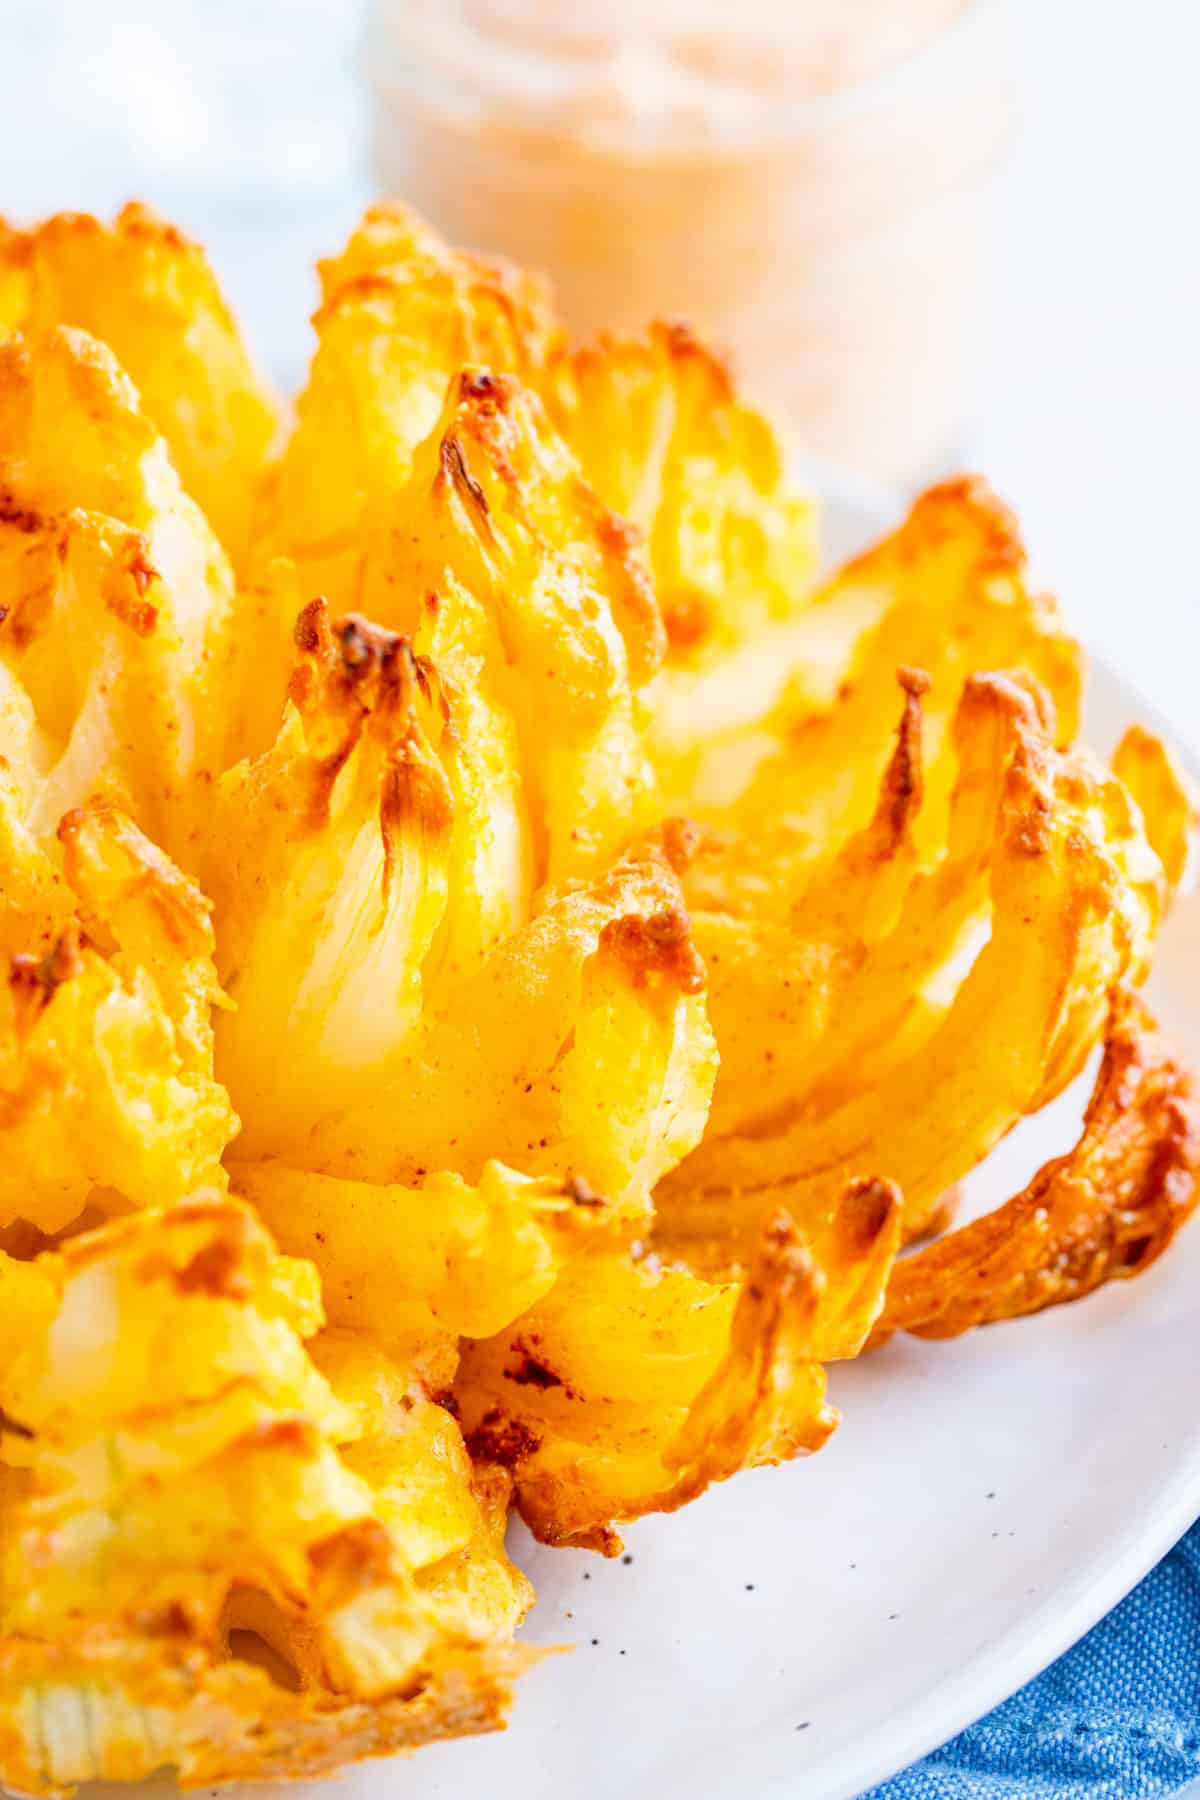 https://forktospoon.com/wp-content/uploads/2023/04/Bloomin-Onion-11-scaled.jpg